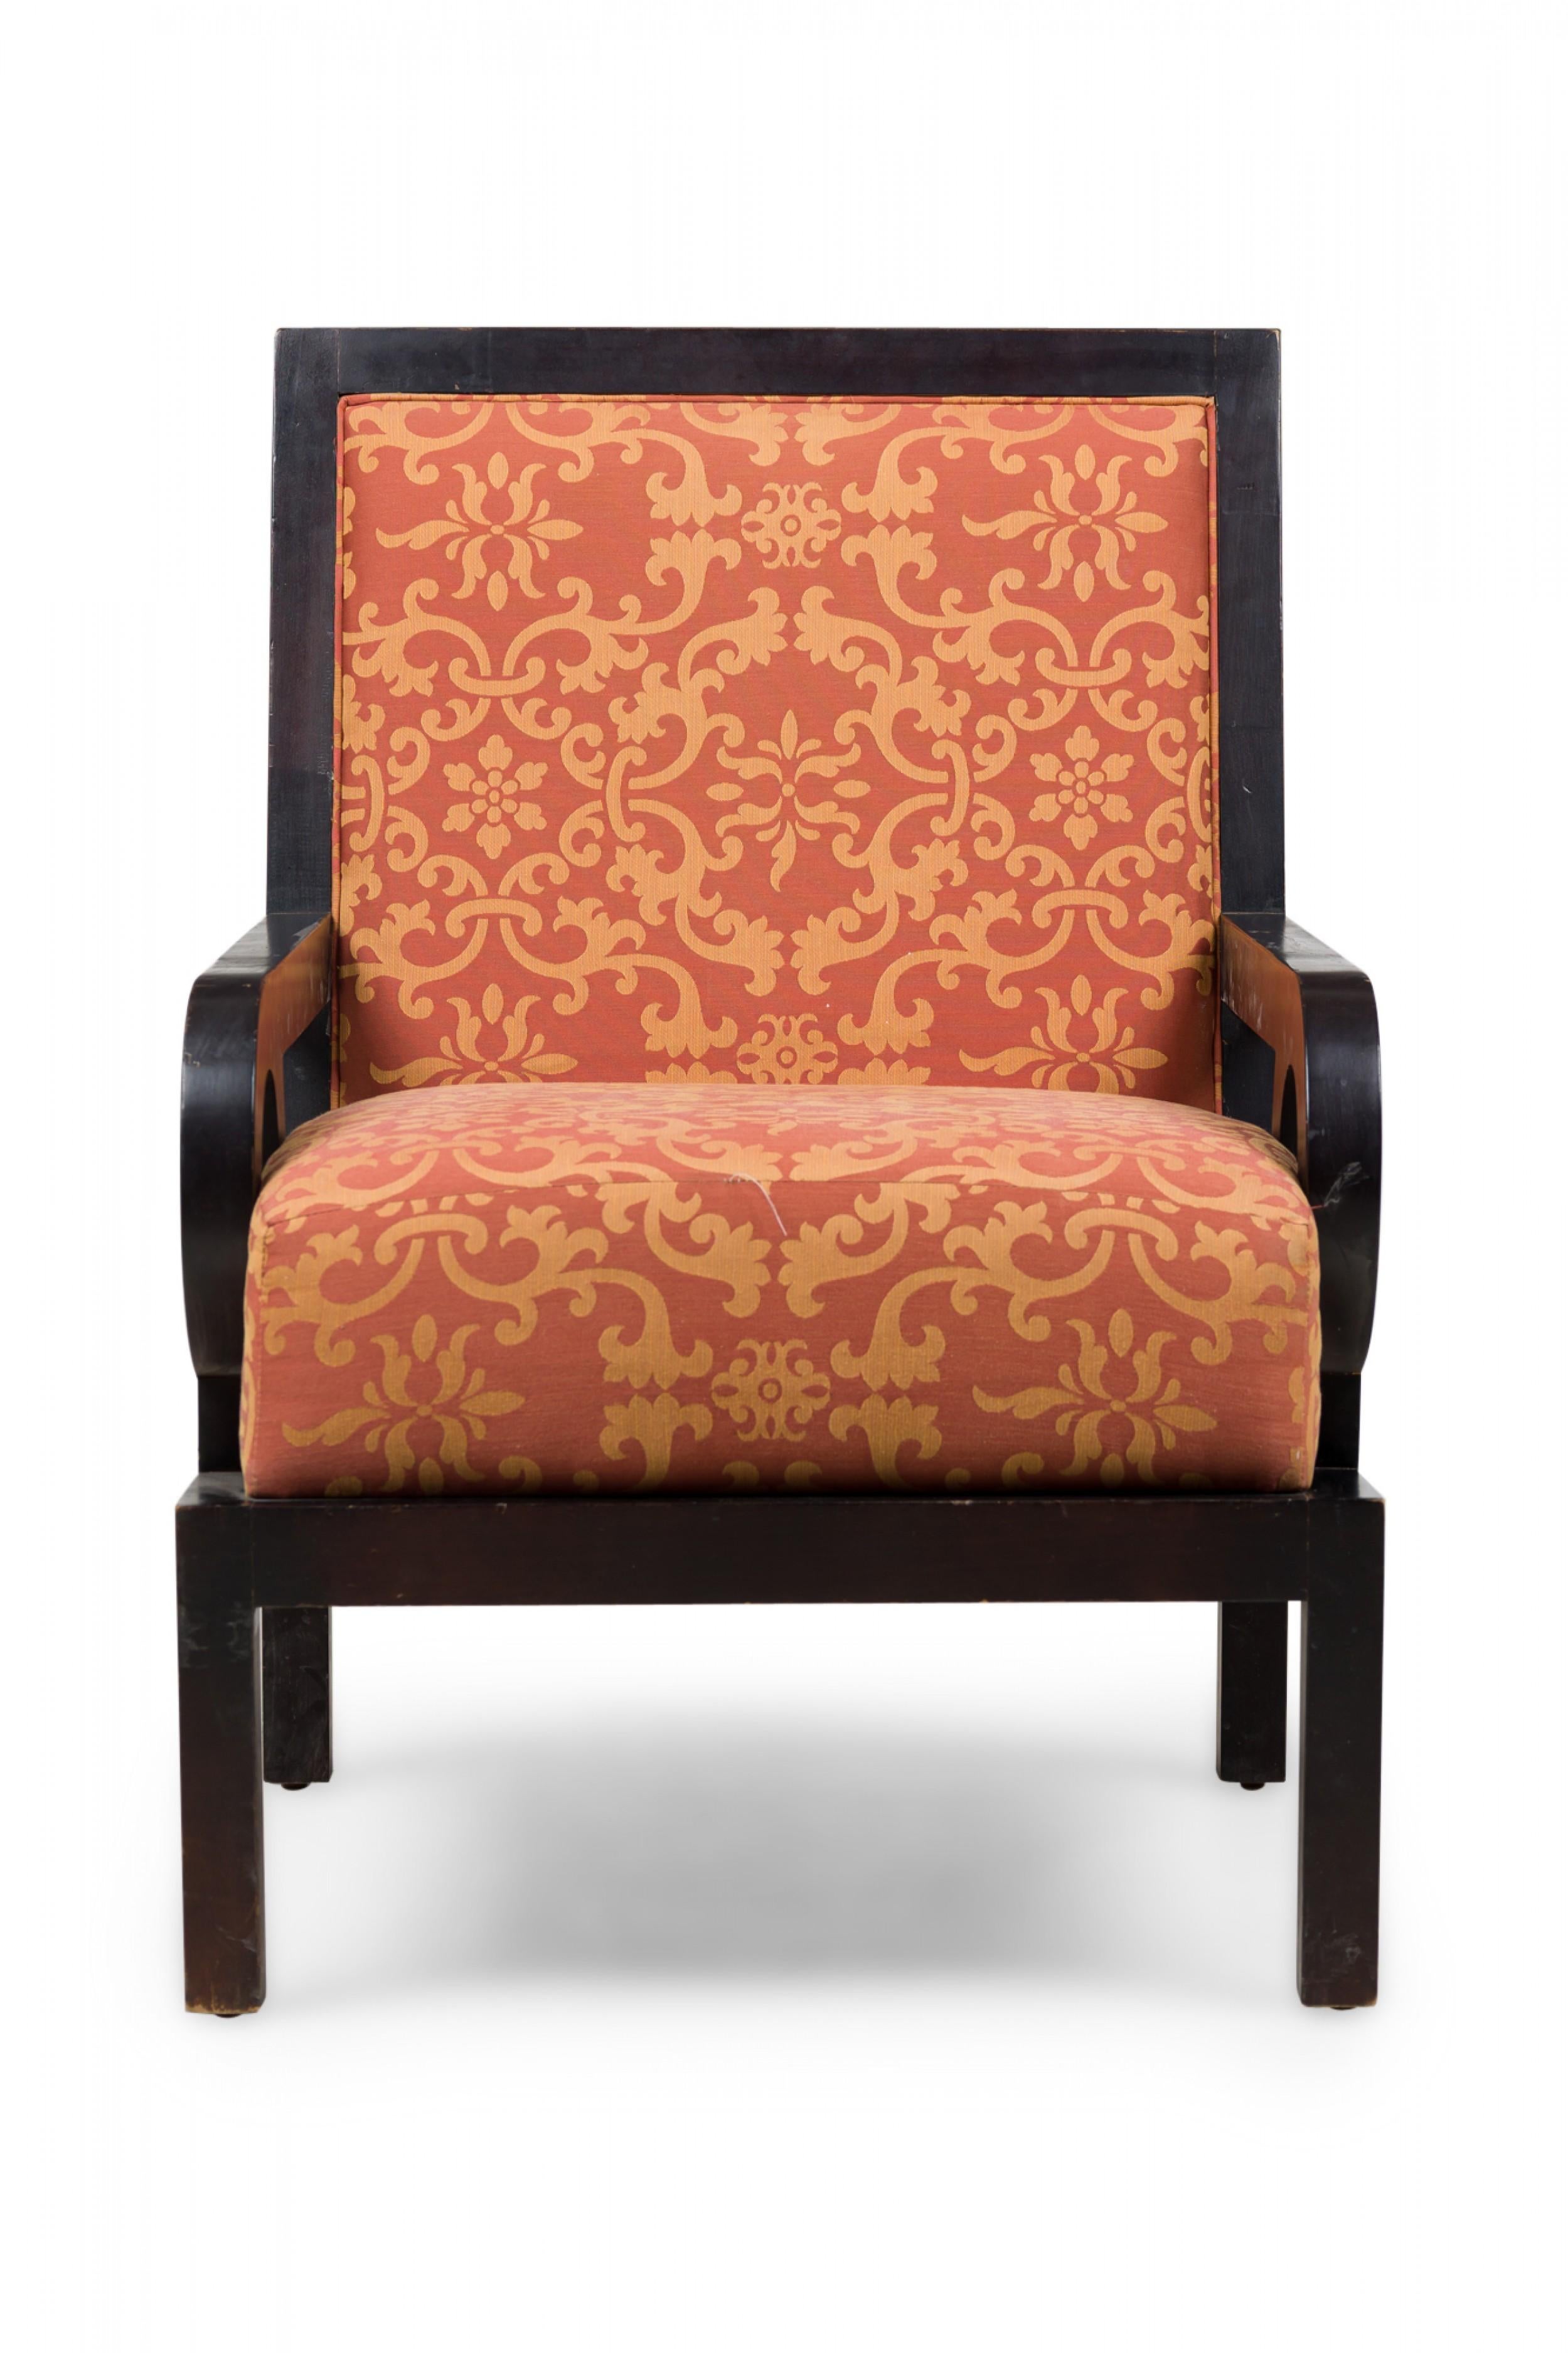 PAIR of midcentury English oversized club / armchairs with dark finished walnut frames with square backs and armrests with circular cutouts, upholstered in a rust orange and gold patterned damask fabric. (Maitland-Smith) (PRICED AS PAIR).